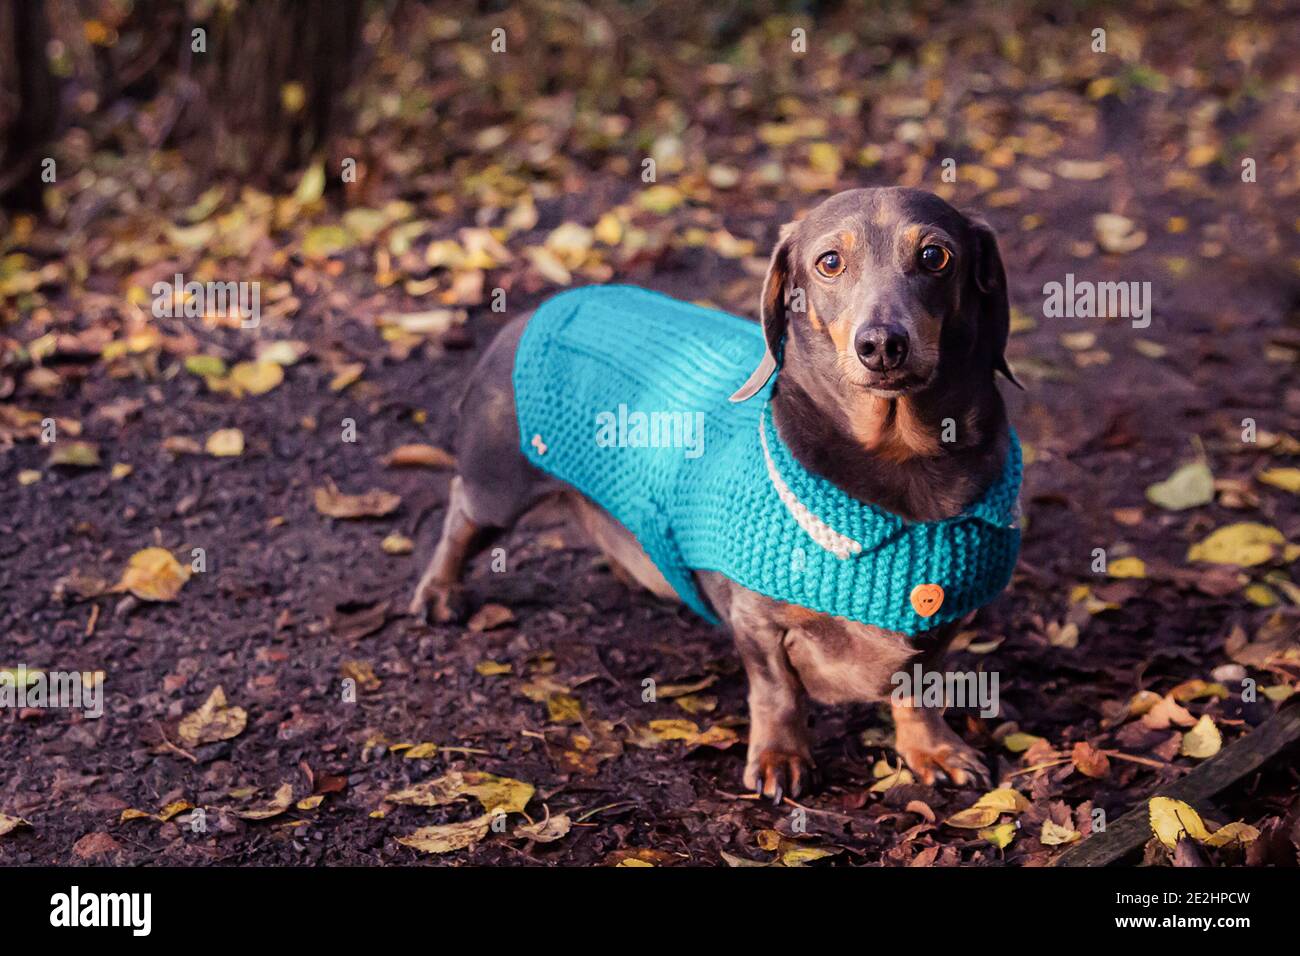 Dogs In Coats High Resolution Stock Photography and Images - Alamy